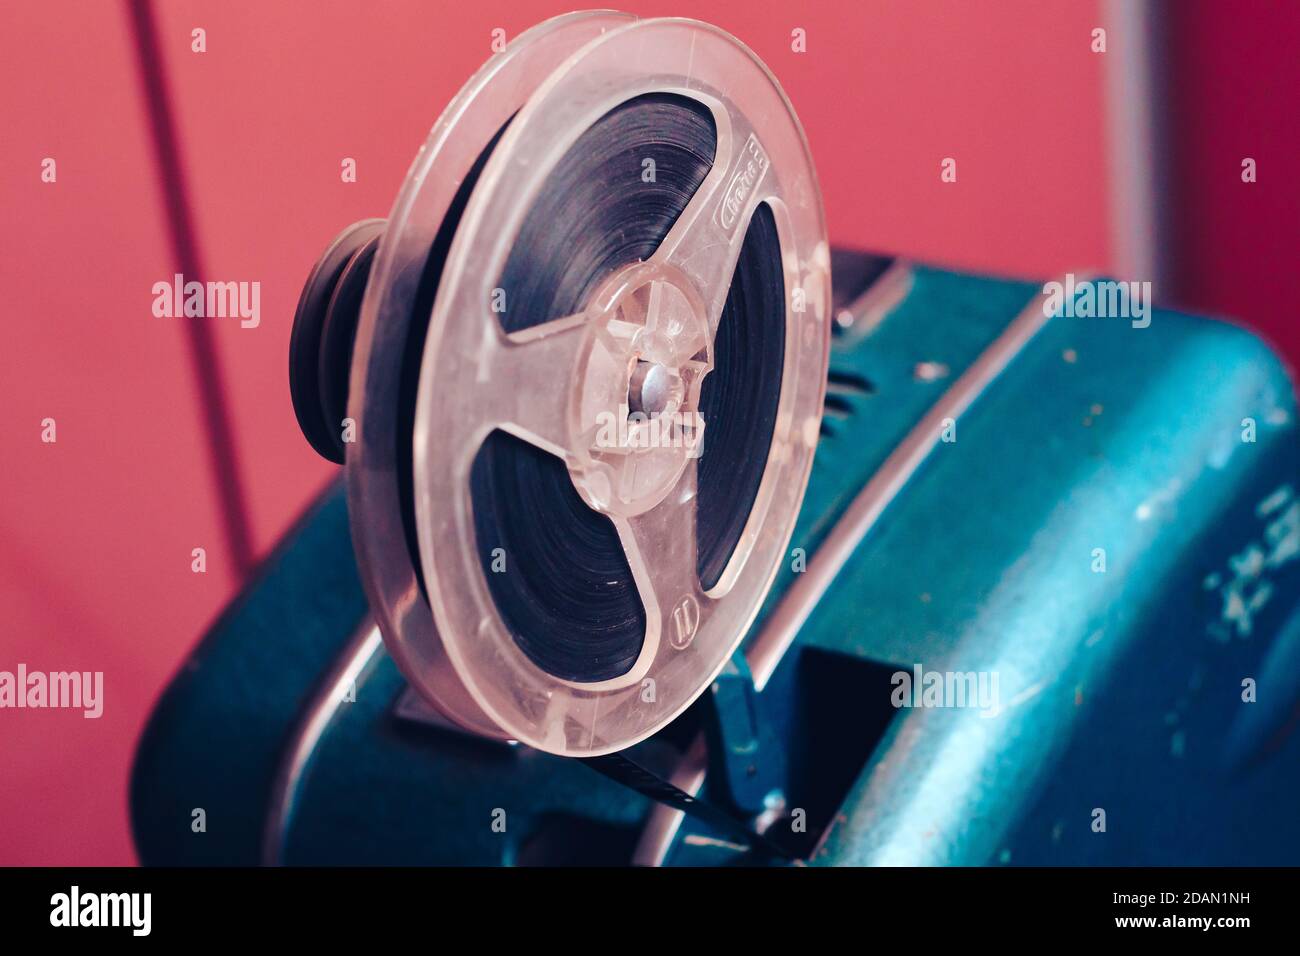 Old 8mm Film Projector over pink textured background. Retro style 60's banner concept Stock Photo